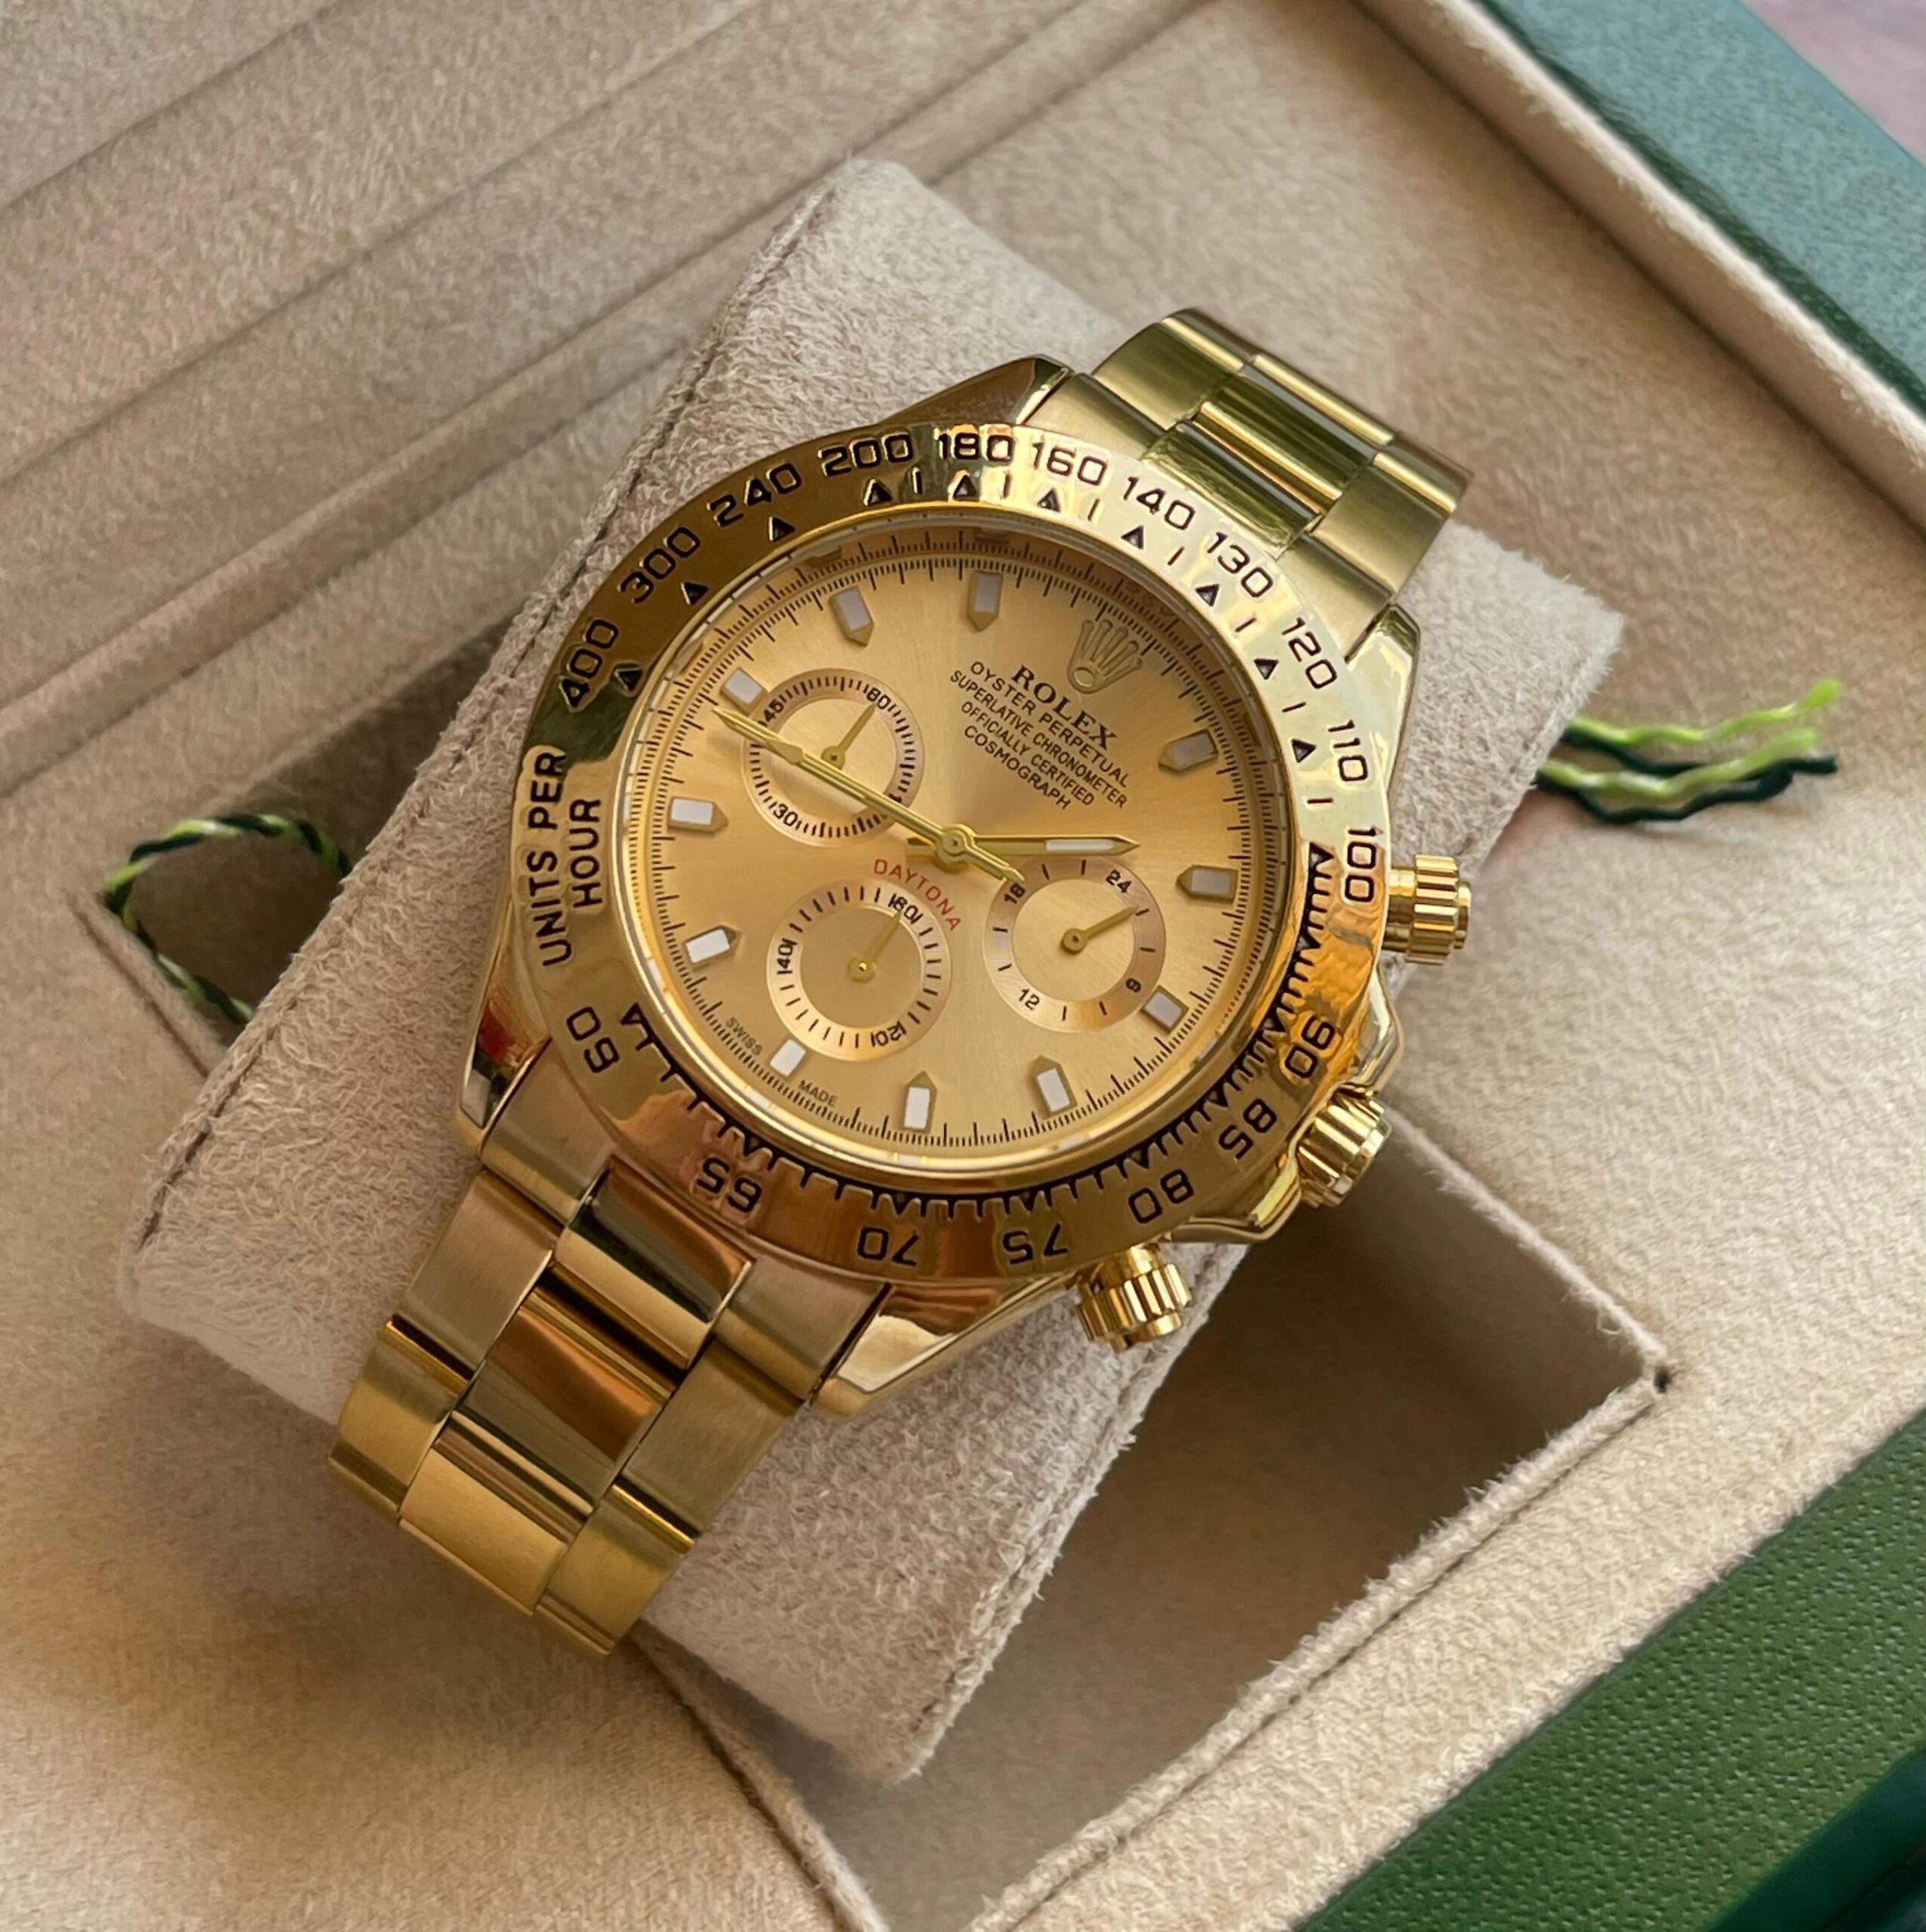 Rolex Daytona Oyster Perpetual The Epitome of Performance and Prestige in a Full Gold Metal Chronograph 7A Premium Quality Dial Size-43mm Men’s Watch